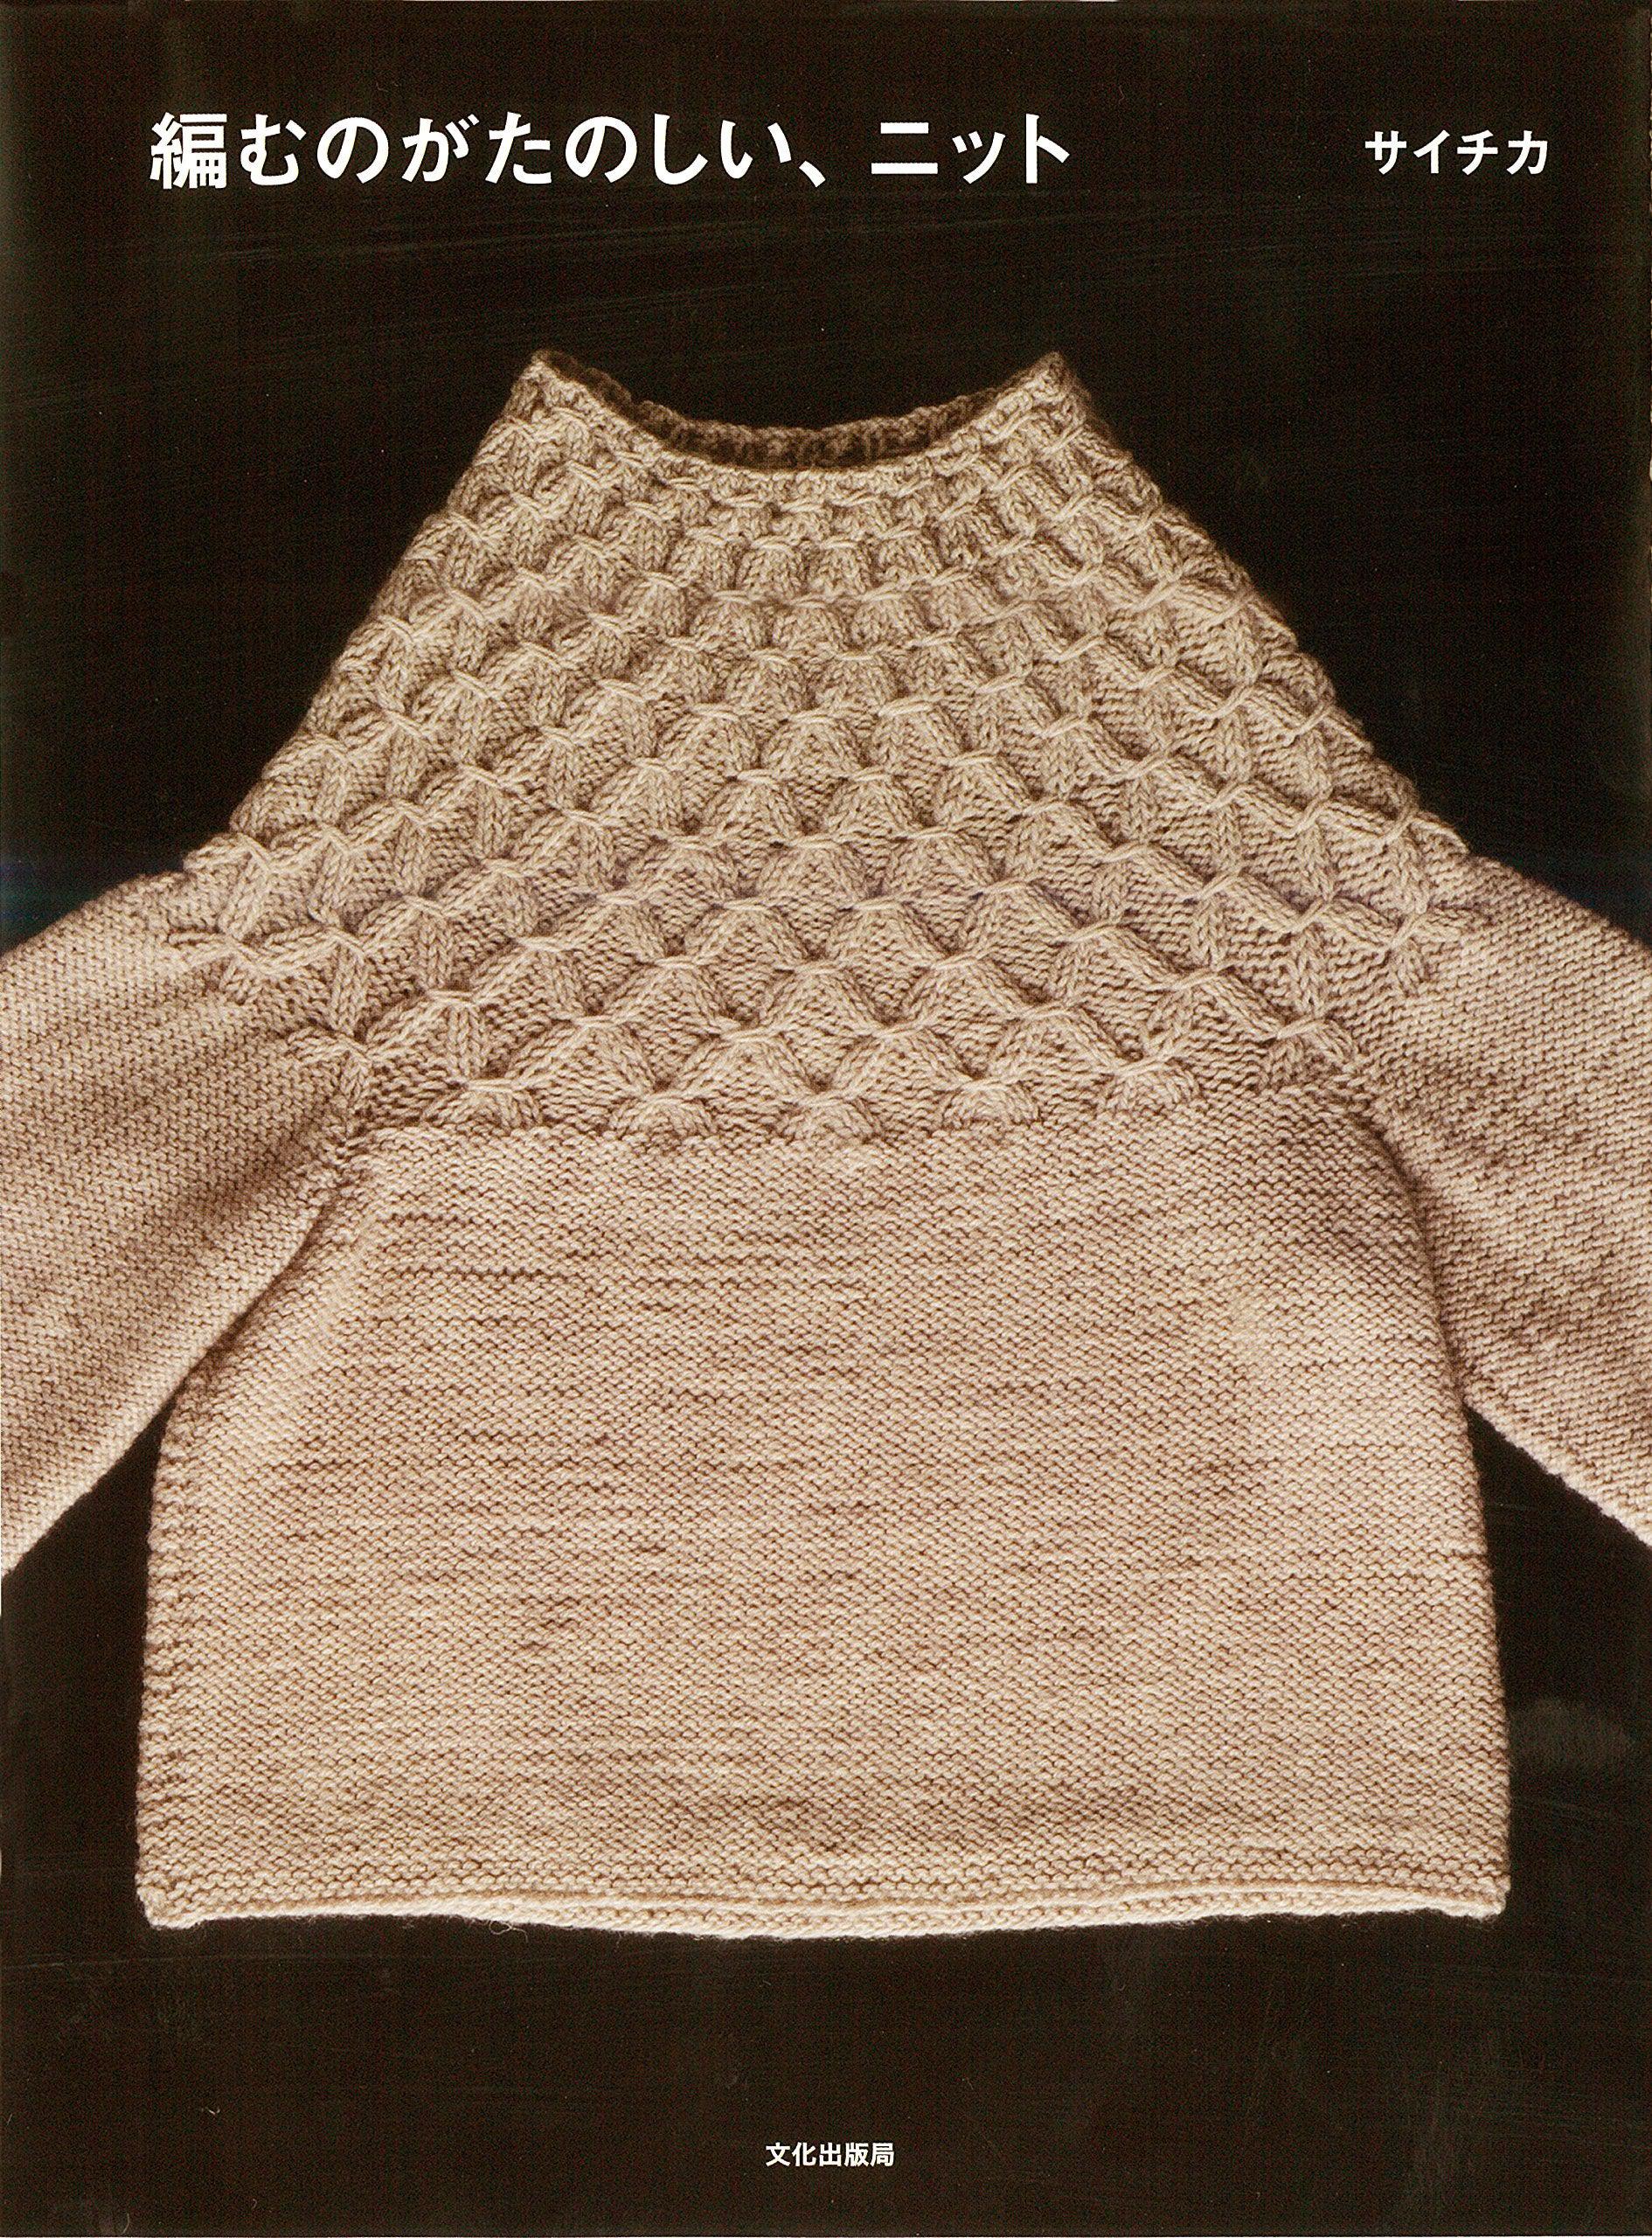 Knits that are fun to knit